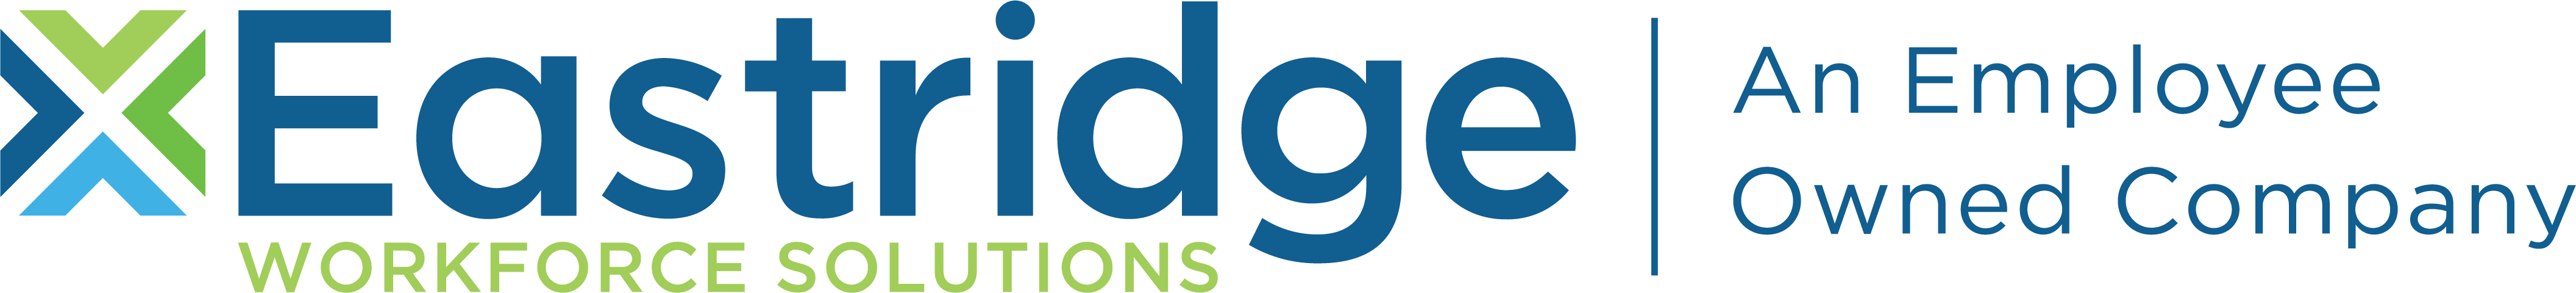 Eastrigdge Workforce solutions | An Employee Owned Company logo